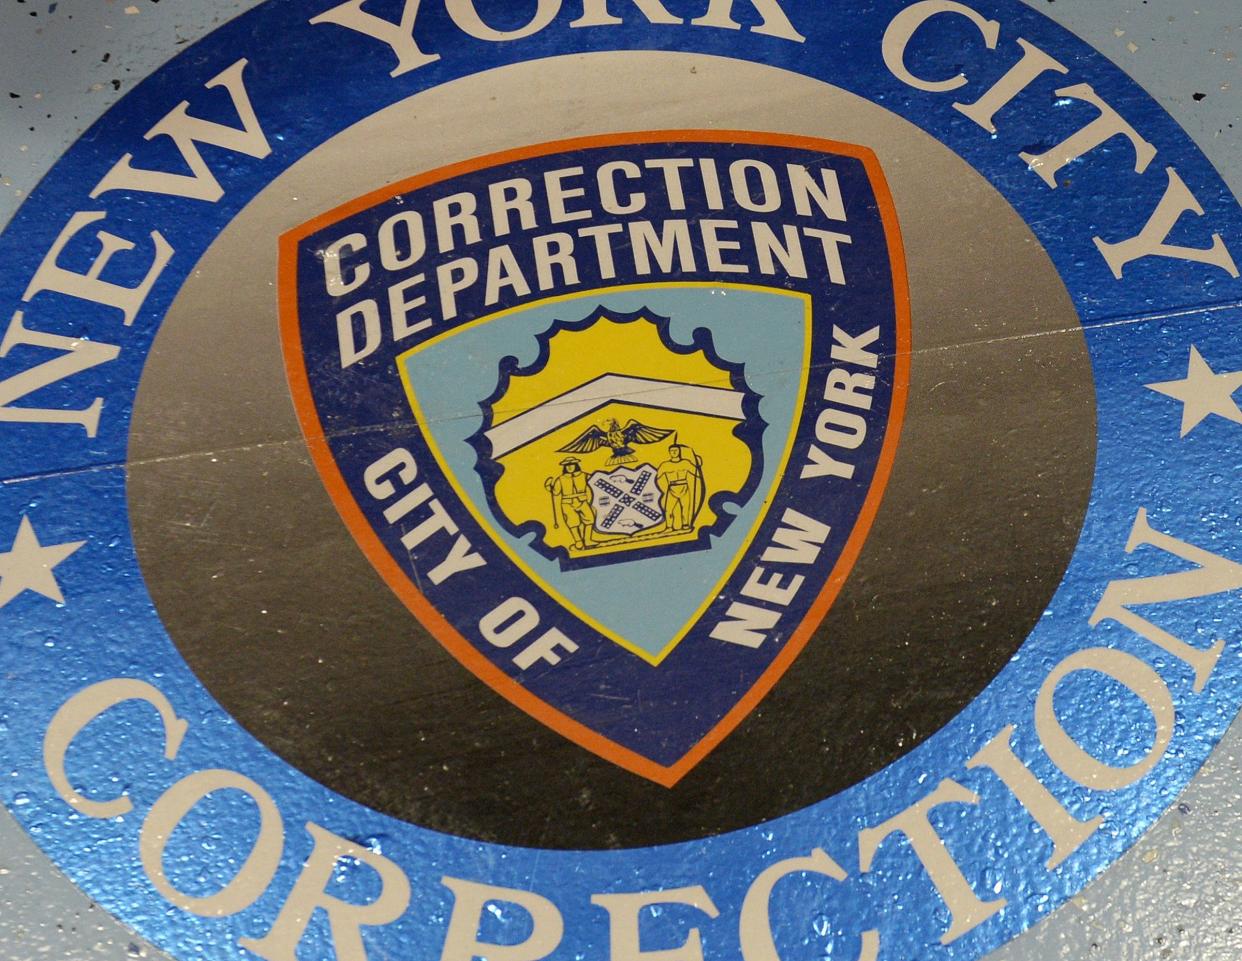 The Department of Corrections seal is pictured on the floor of a cell block on Rikers Island. 